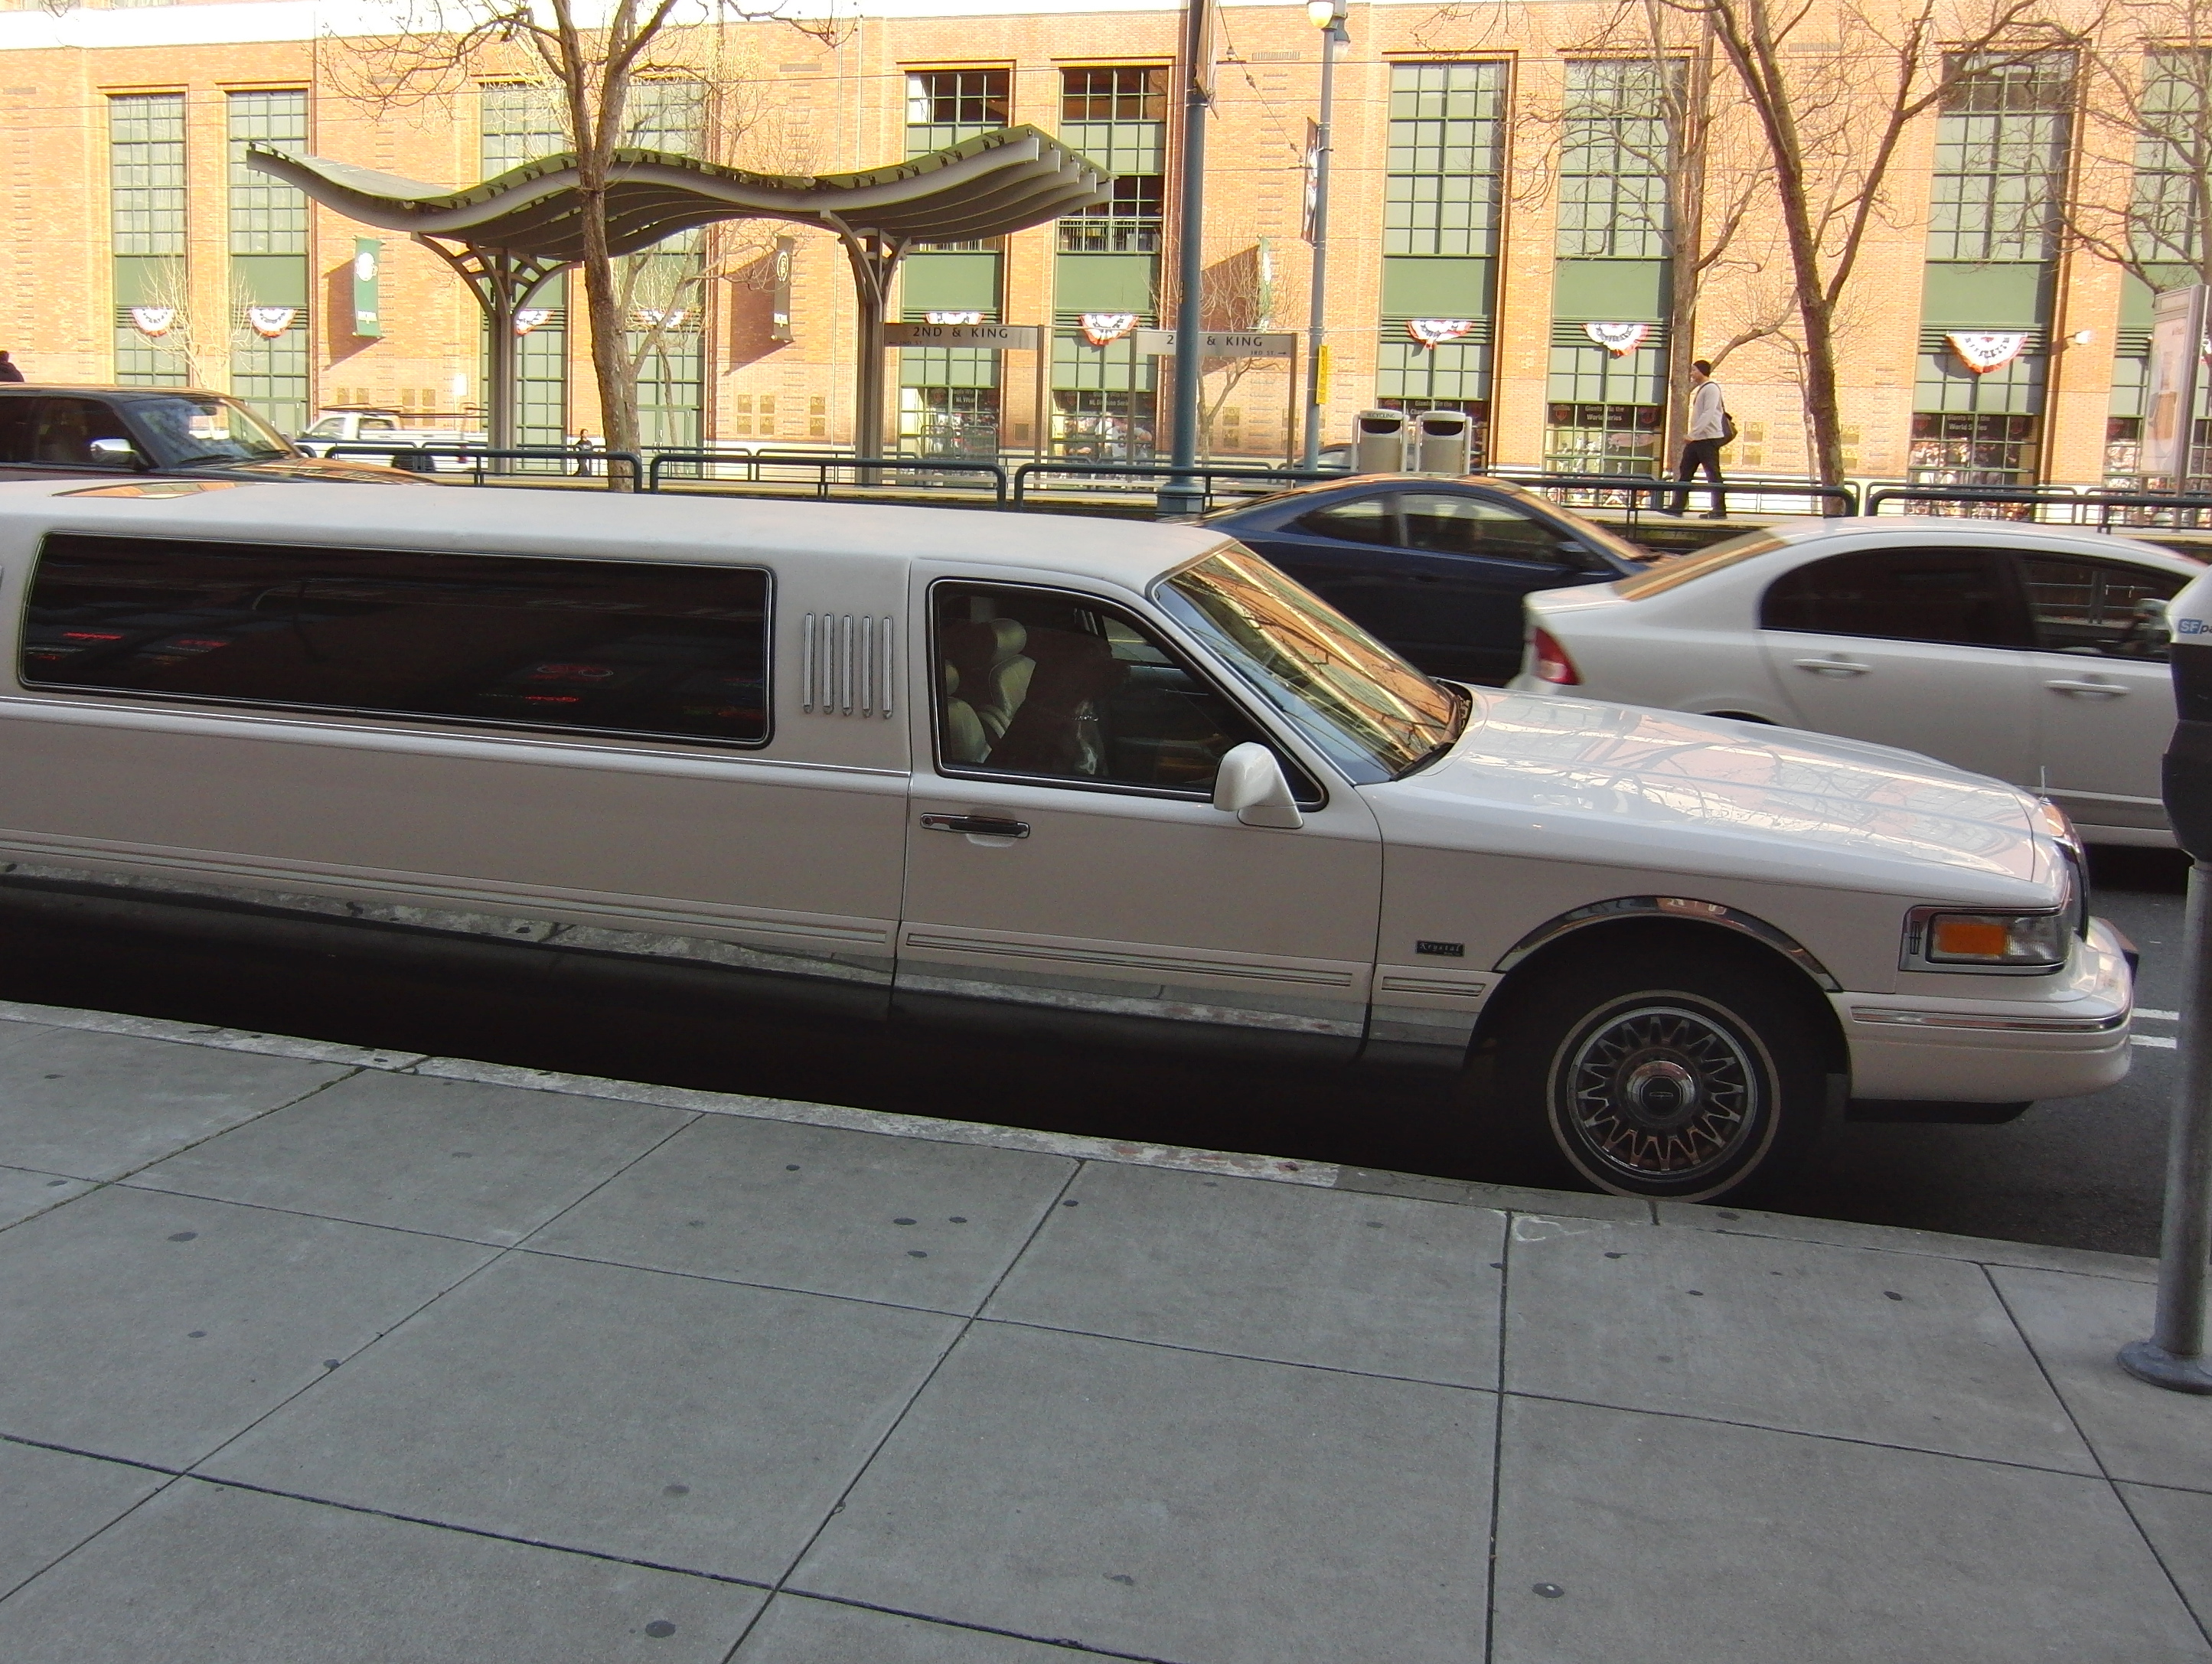 Pit Bull in a Stretch Limo